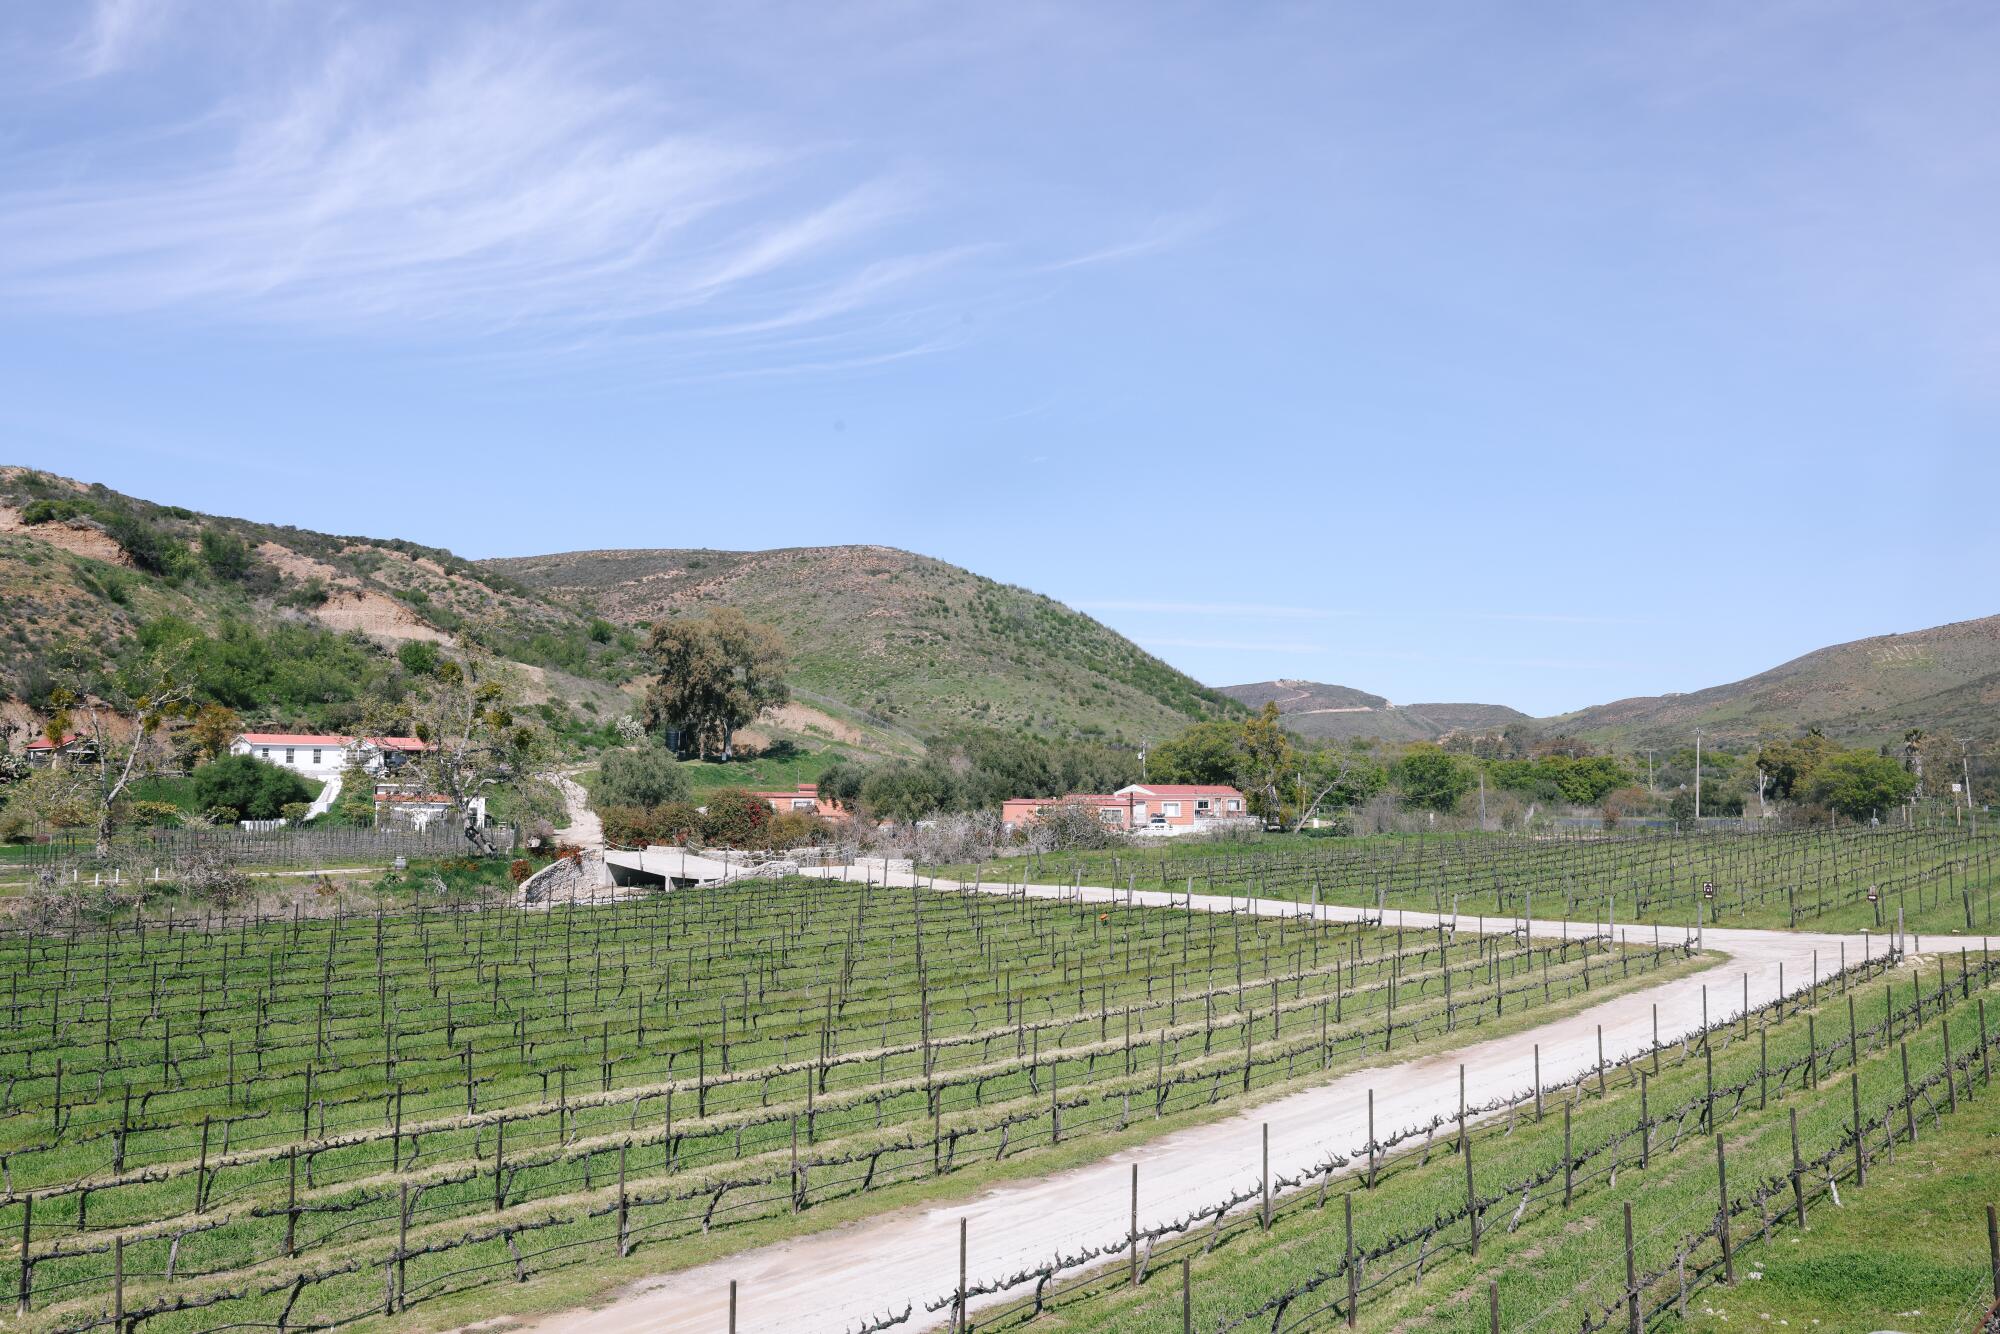 A landscape image of a winery in Valle de Guadalupe.